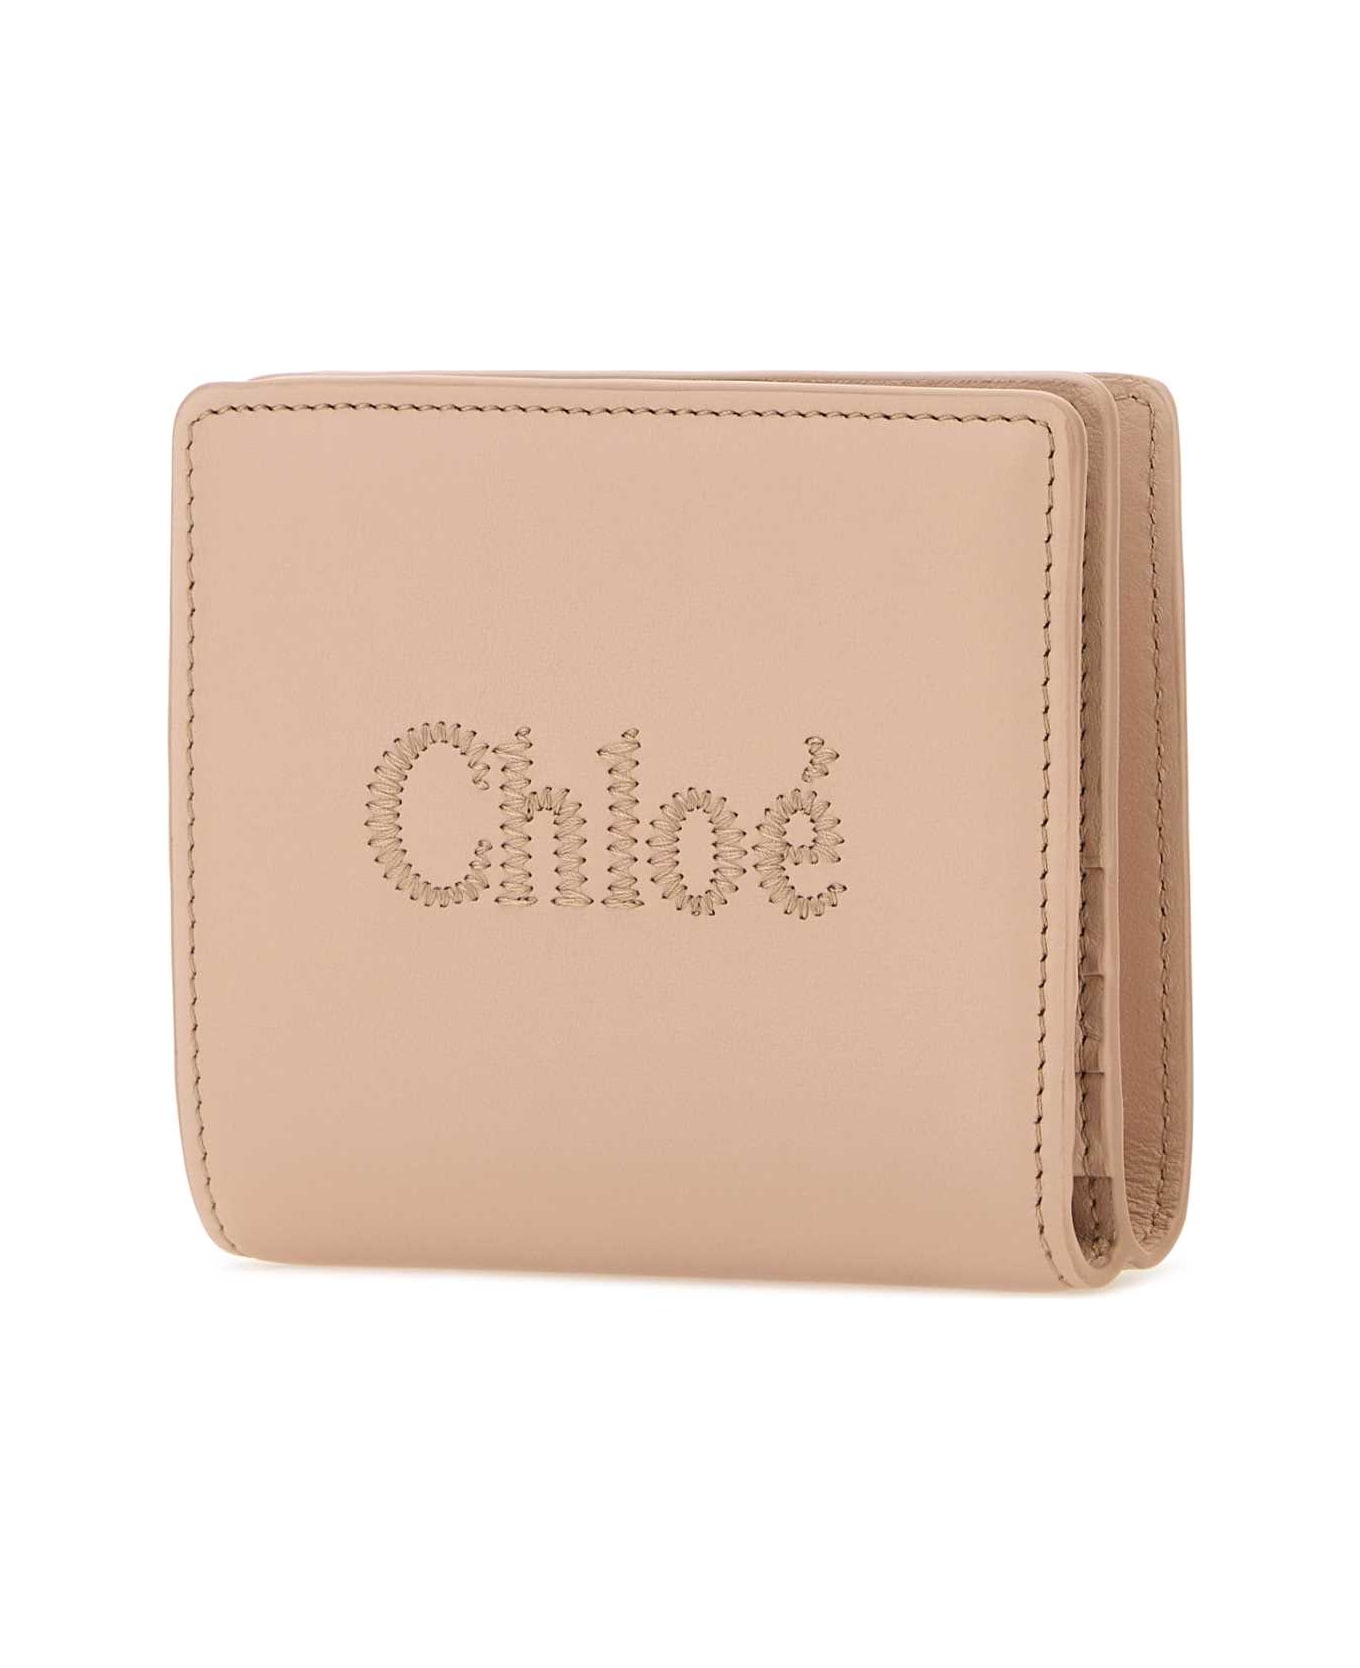 Chloé Skin Pink Leather Wallet - CEMENTPINK 財布